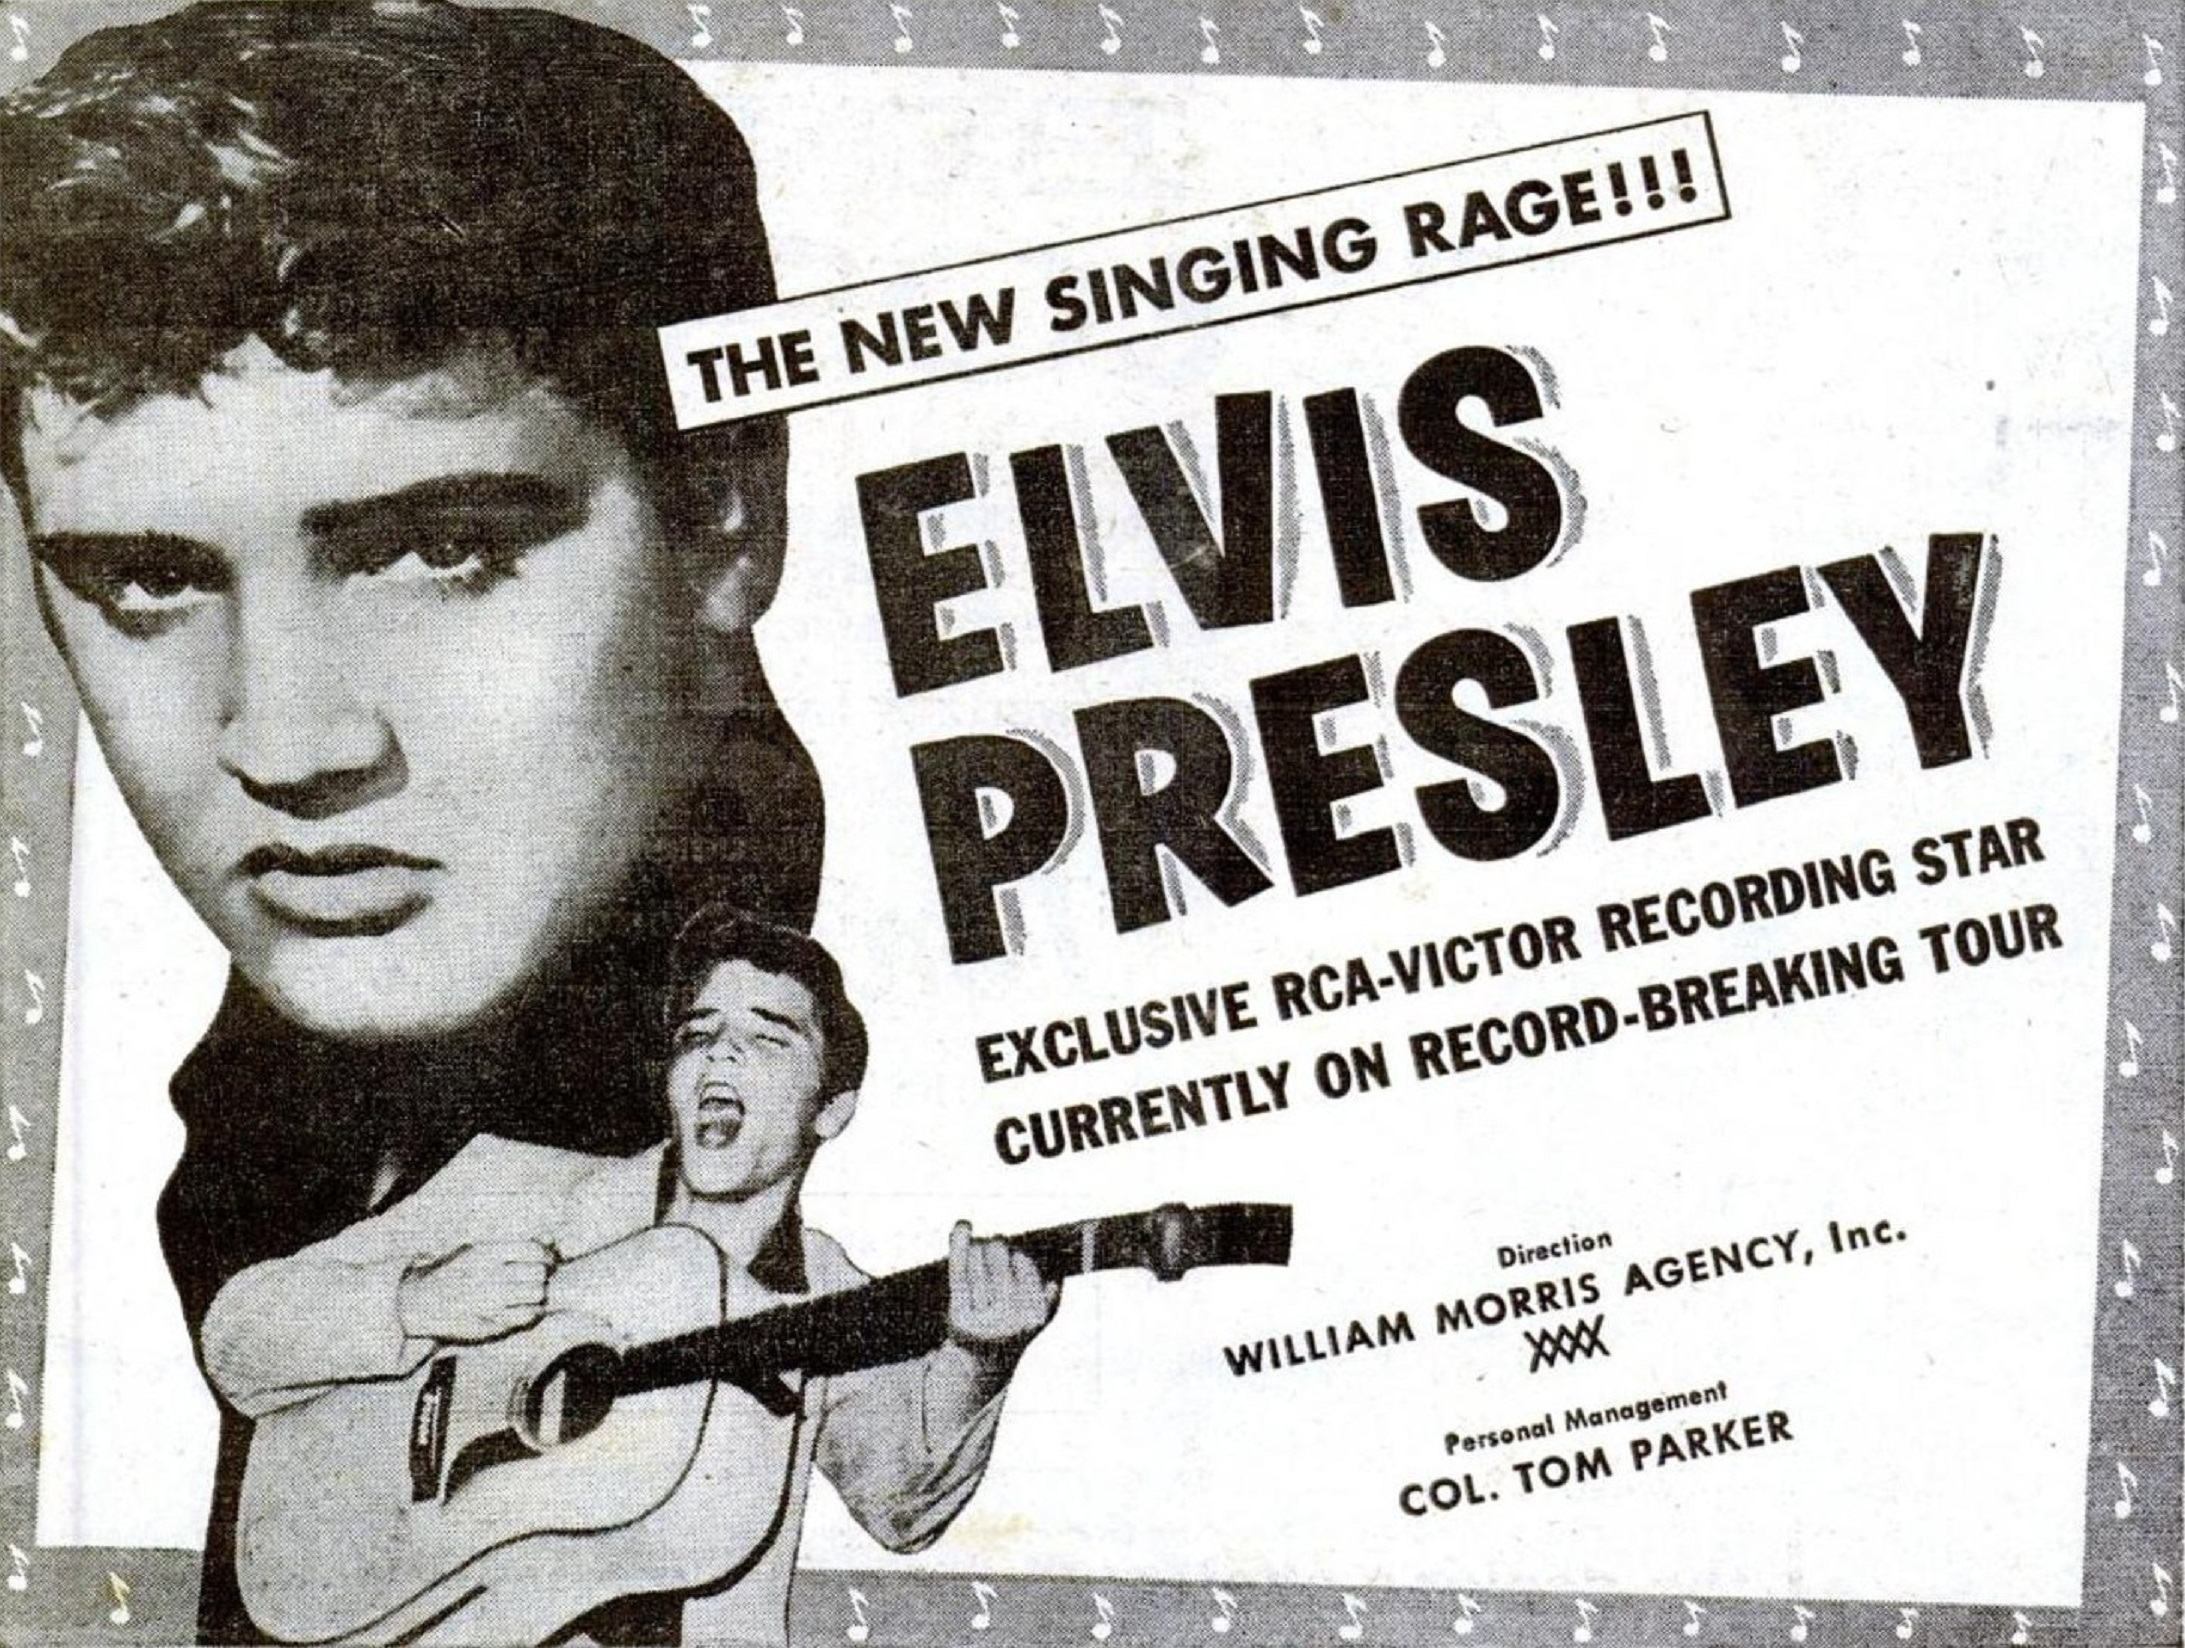 Elvis Presley the King of Rock and Roll